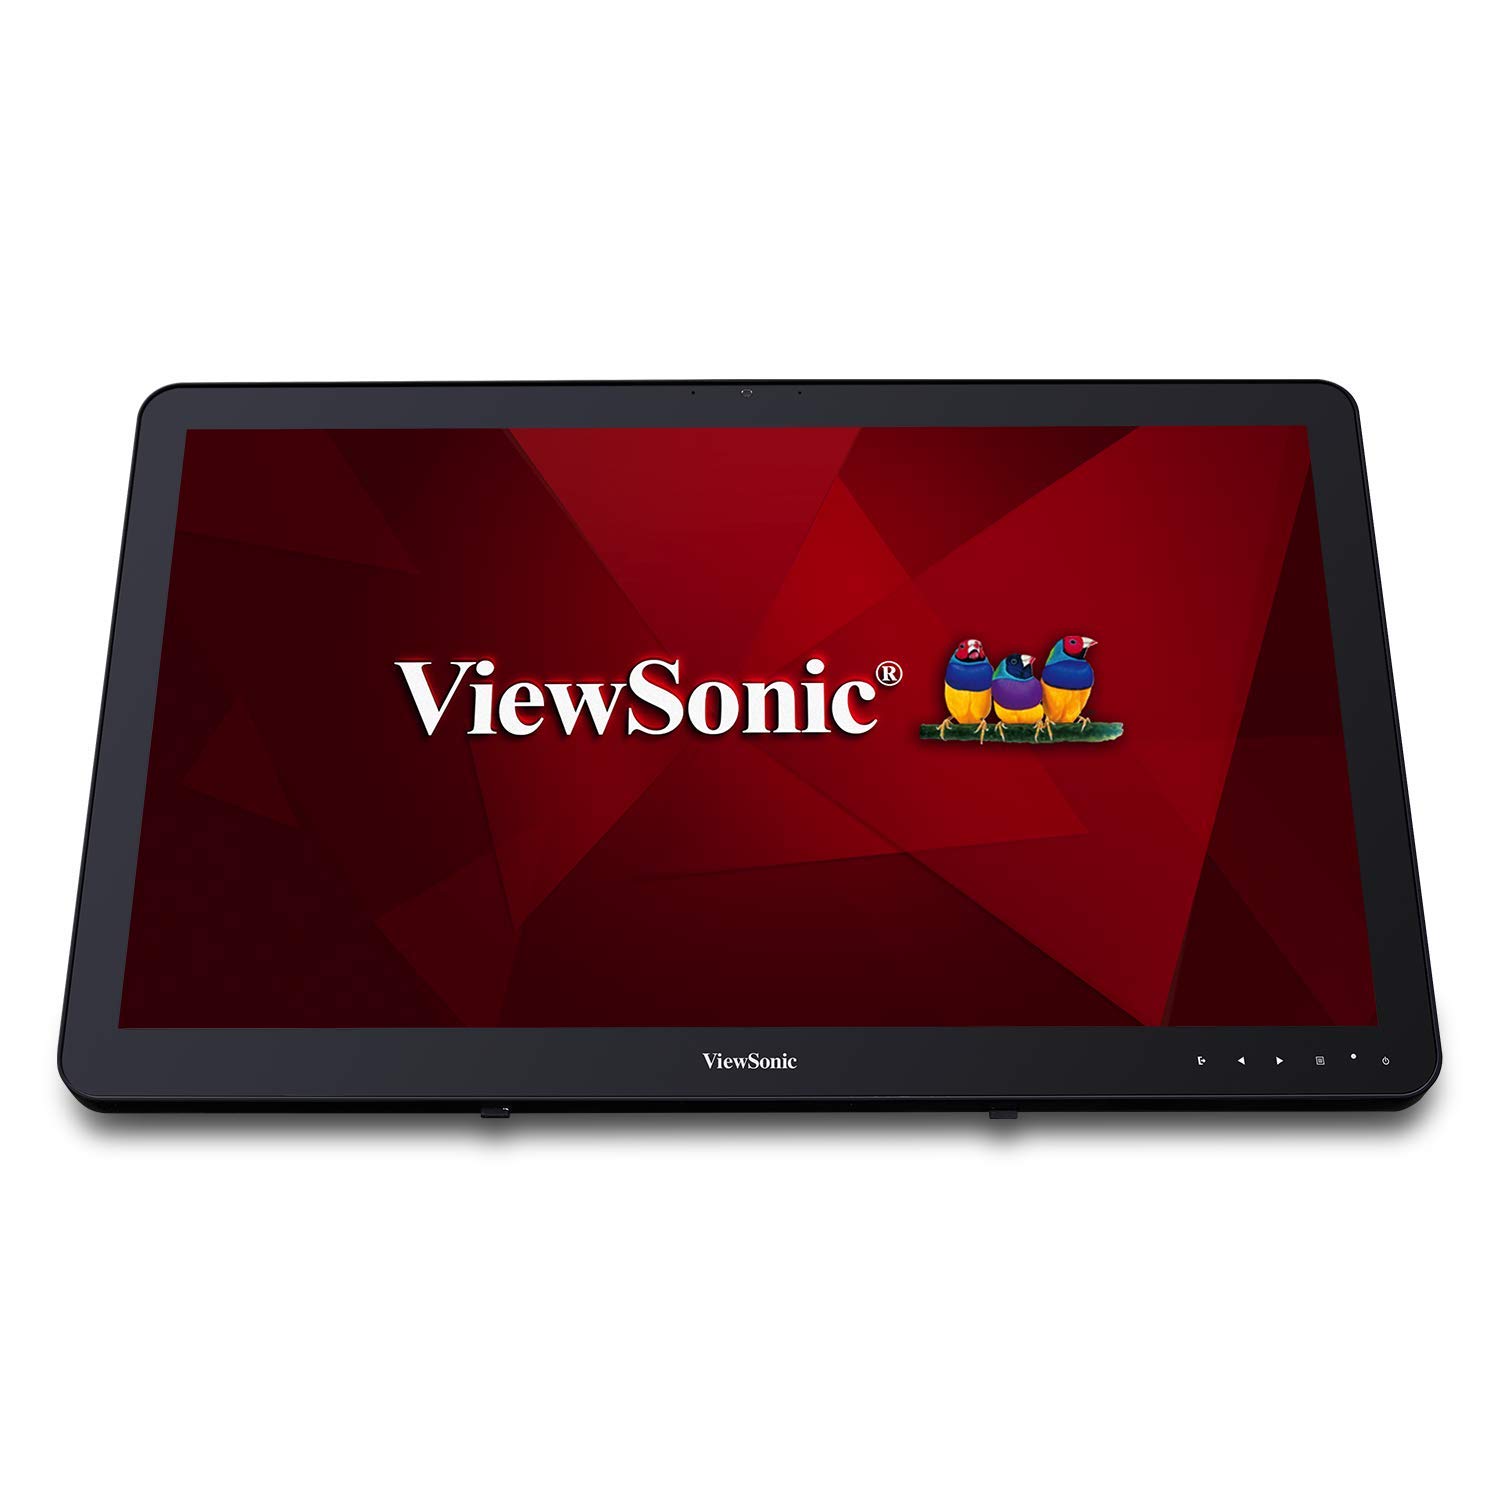 Viewsonic VSD243-BKA-US0 24 Zoll 1080p 10-Punkt Touch Smart Digital Display mit Bluetooth Dual Band Wi-Fi und Android Oreo 8.1 OS